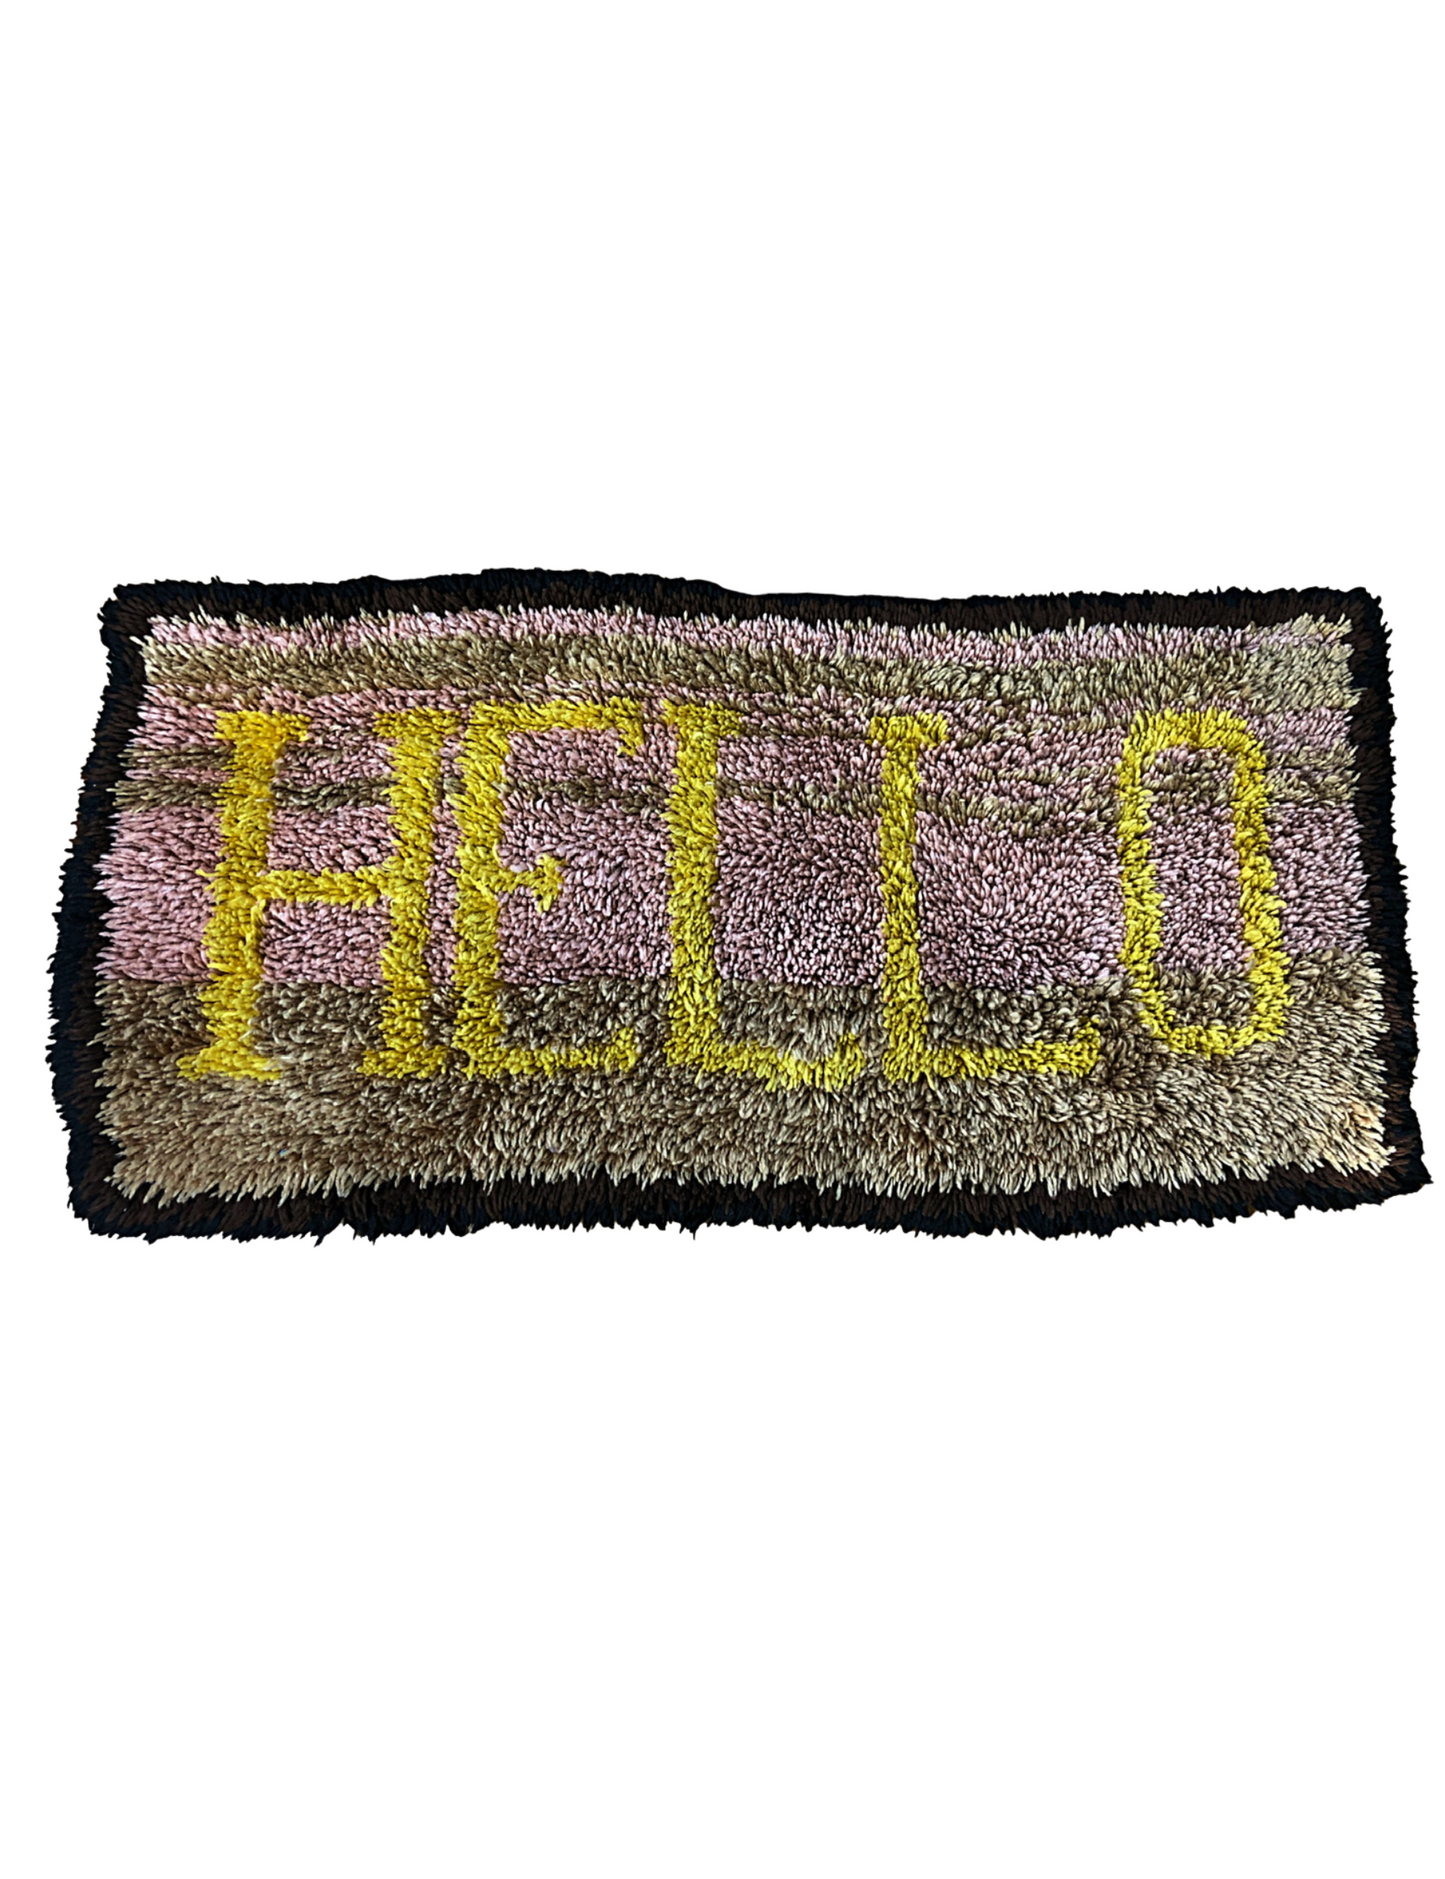 70’s HELLO Retro Hand Tufted Rug Latch Hook Wall Hanging Tapestry 37 X 17.5